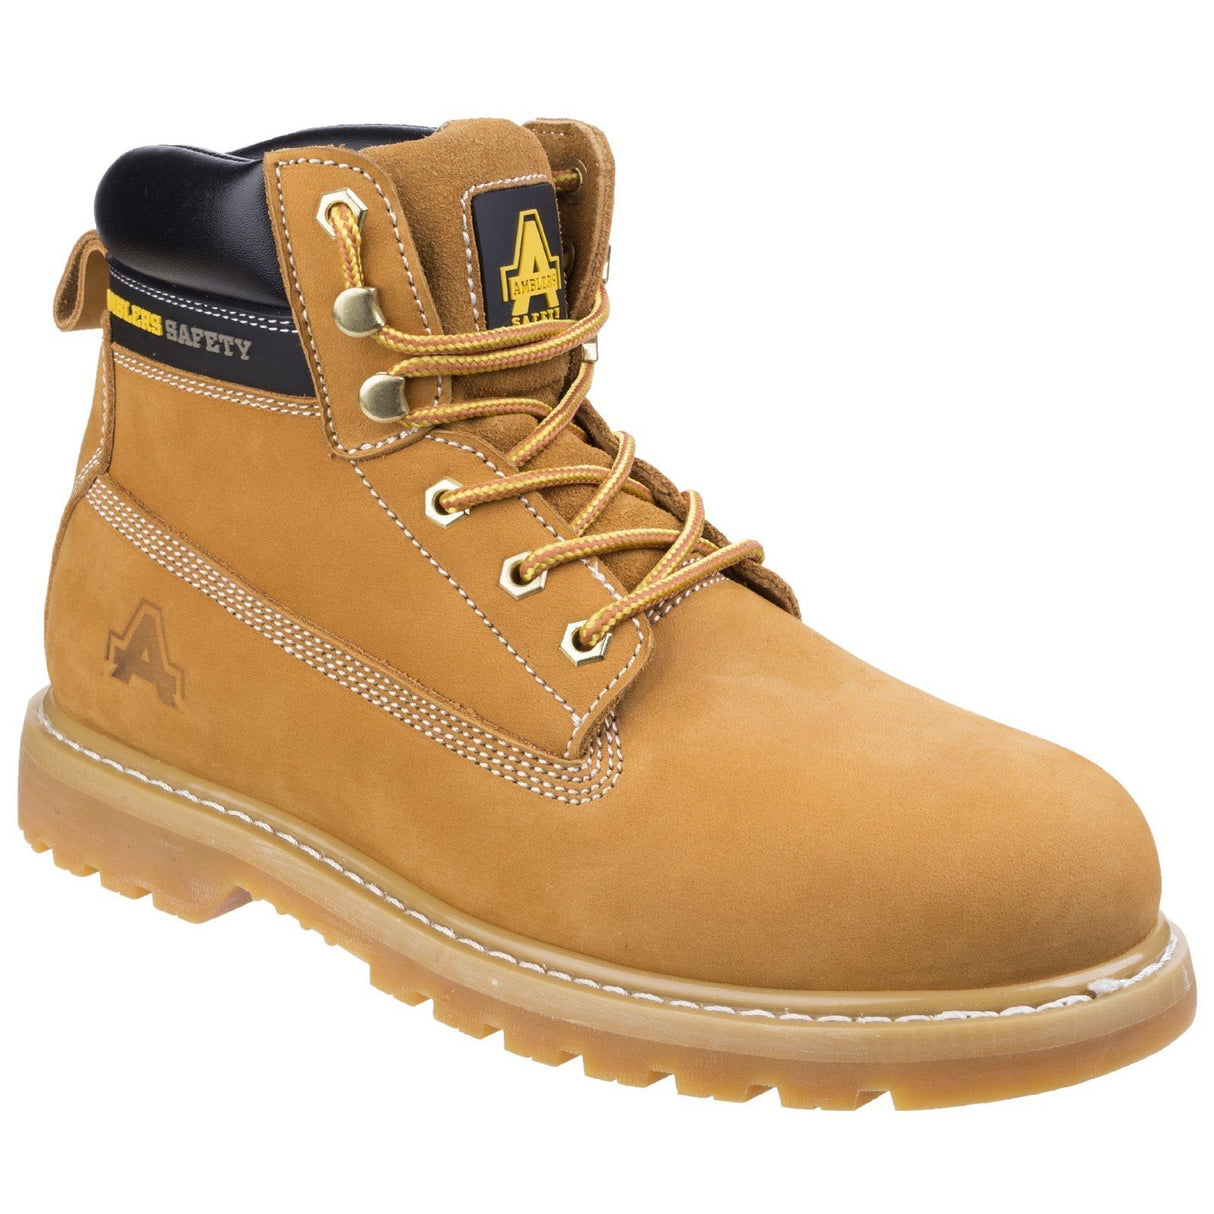 Amblers Safety Goodyear Welted Steel Toe Cap Honey Safety Boots